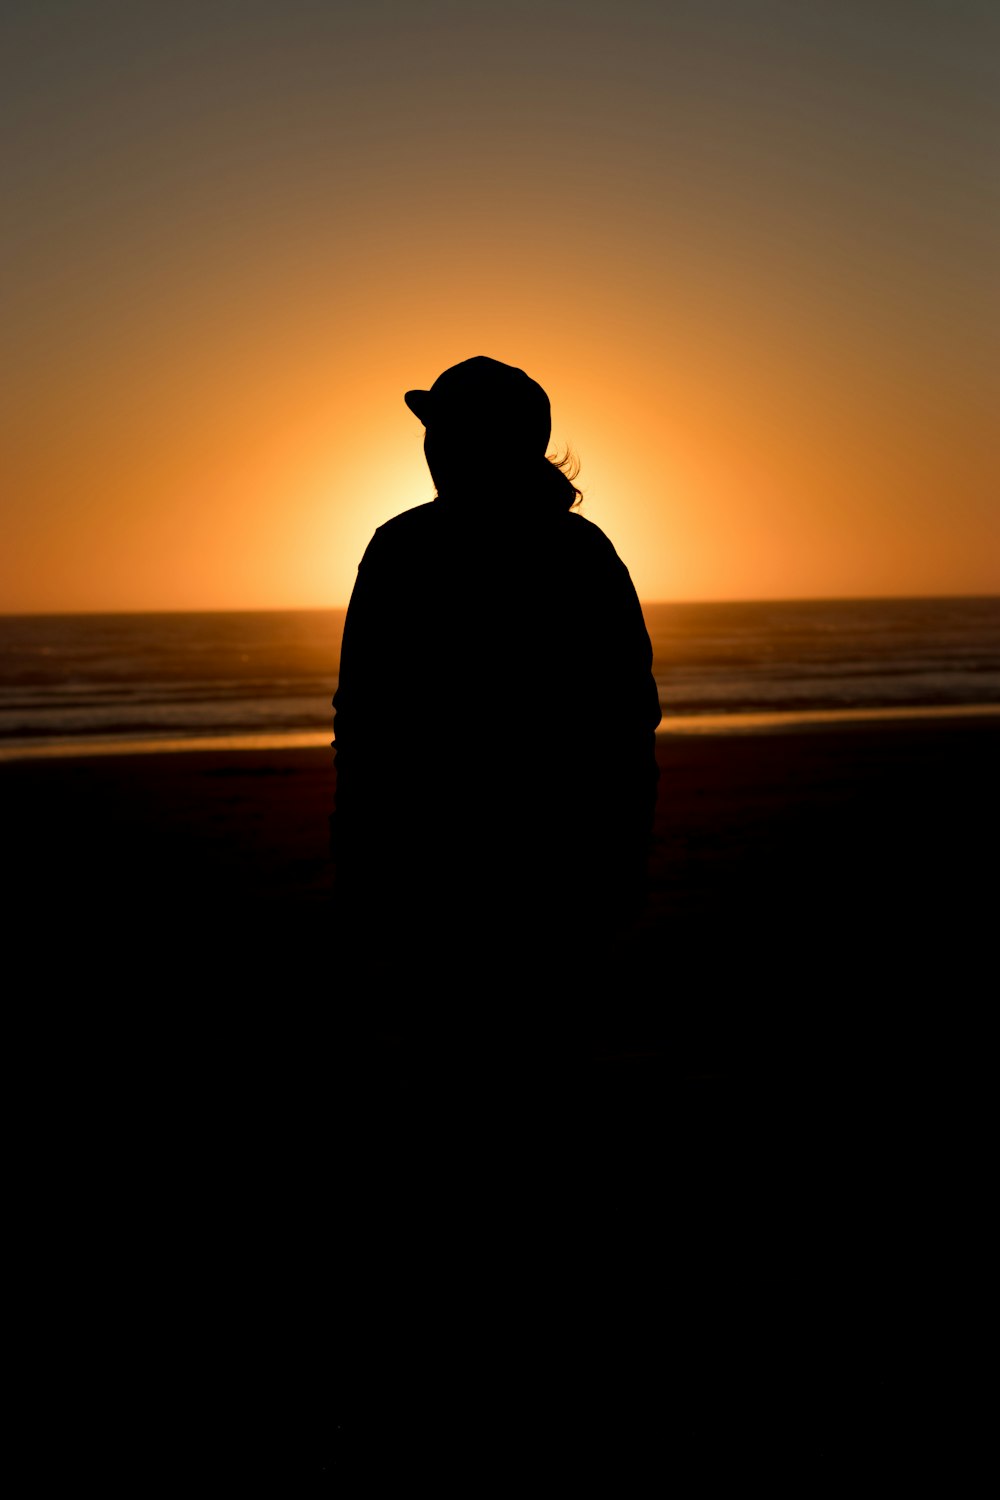 silhouette of person wearing hat standing on beach during sunset